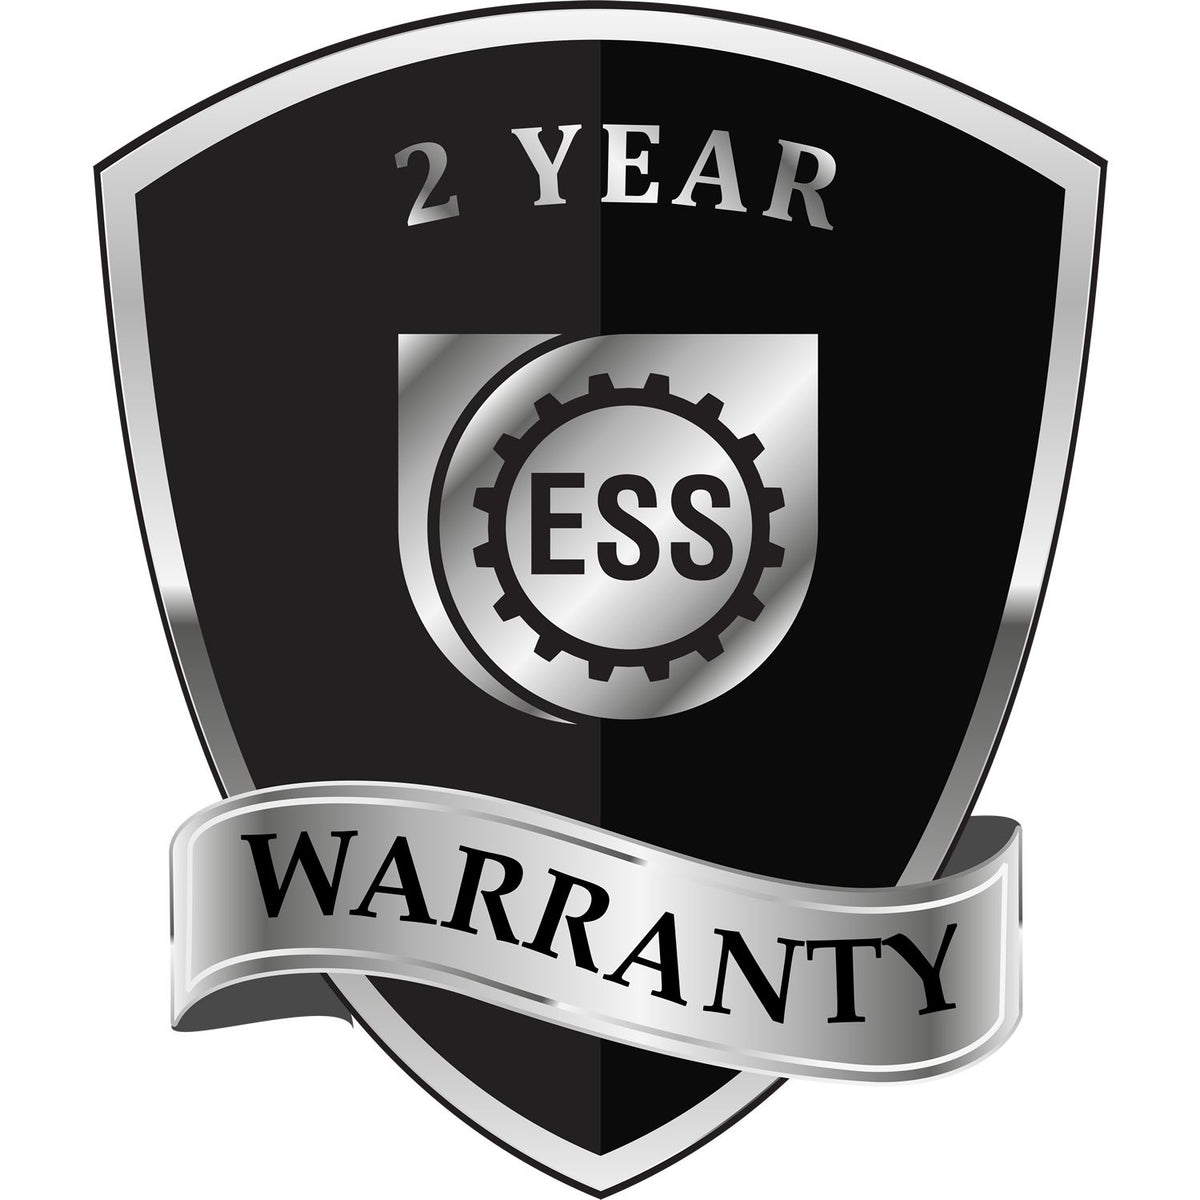 A black and silver badge or emblem showing warranty information for the Hybrid Iowa Engineer Seal